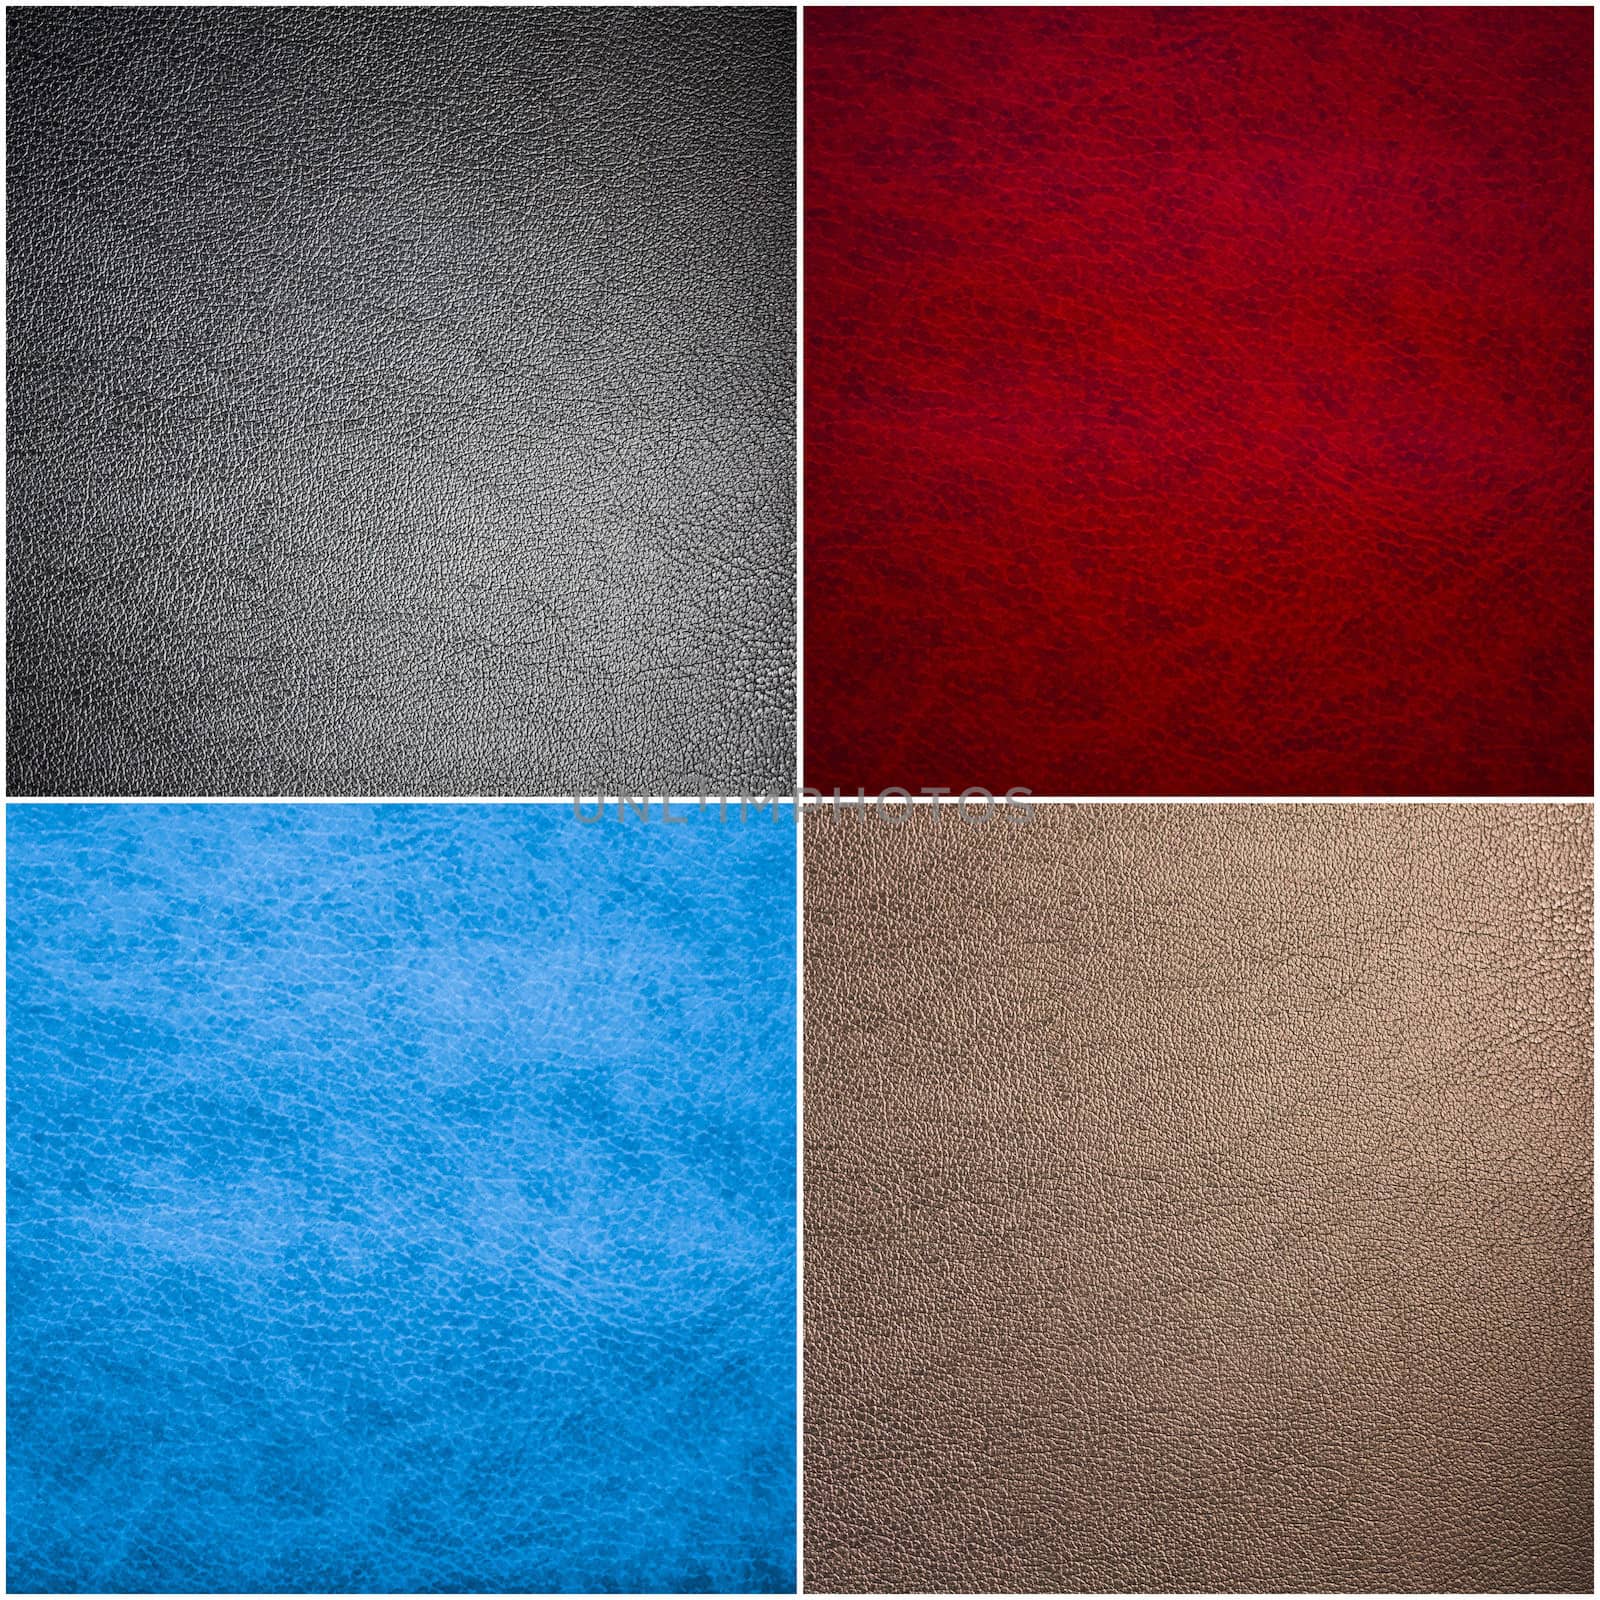 Set Of Leather Texture Made From Deer Skin (Red, Blue, Black, Be by ryhor